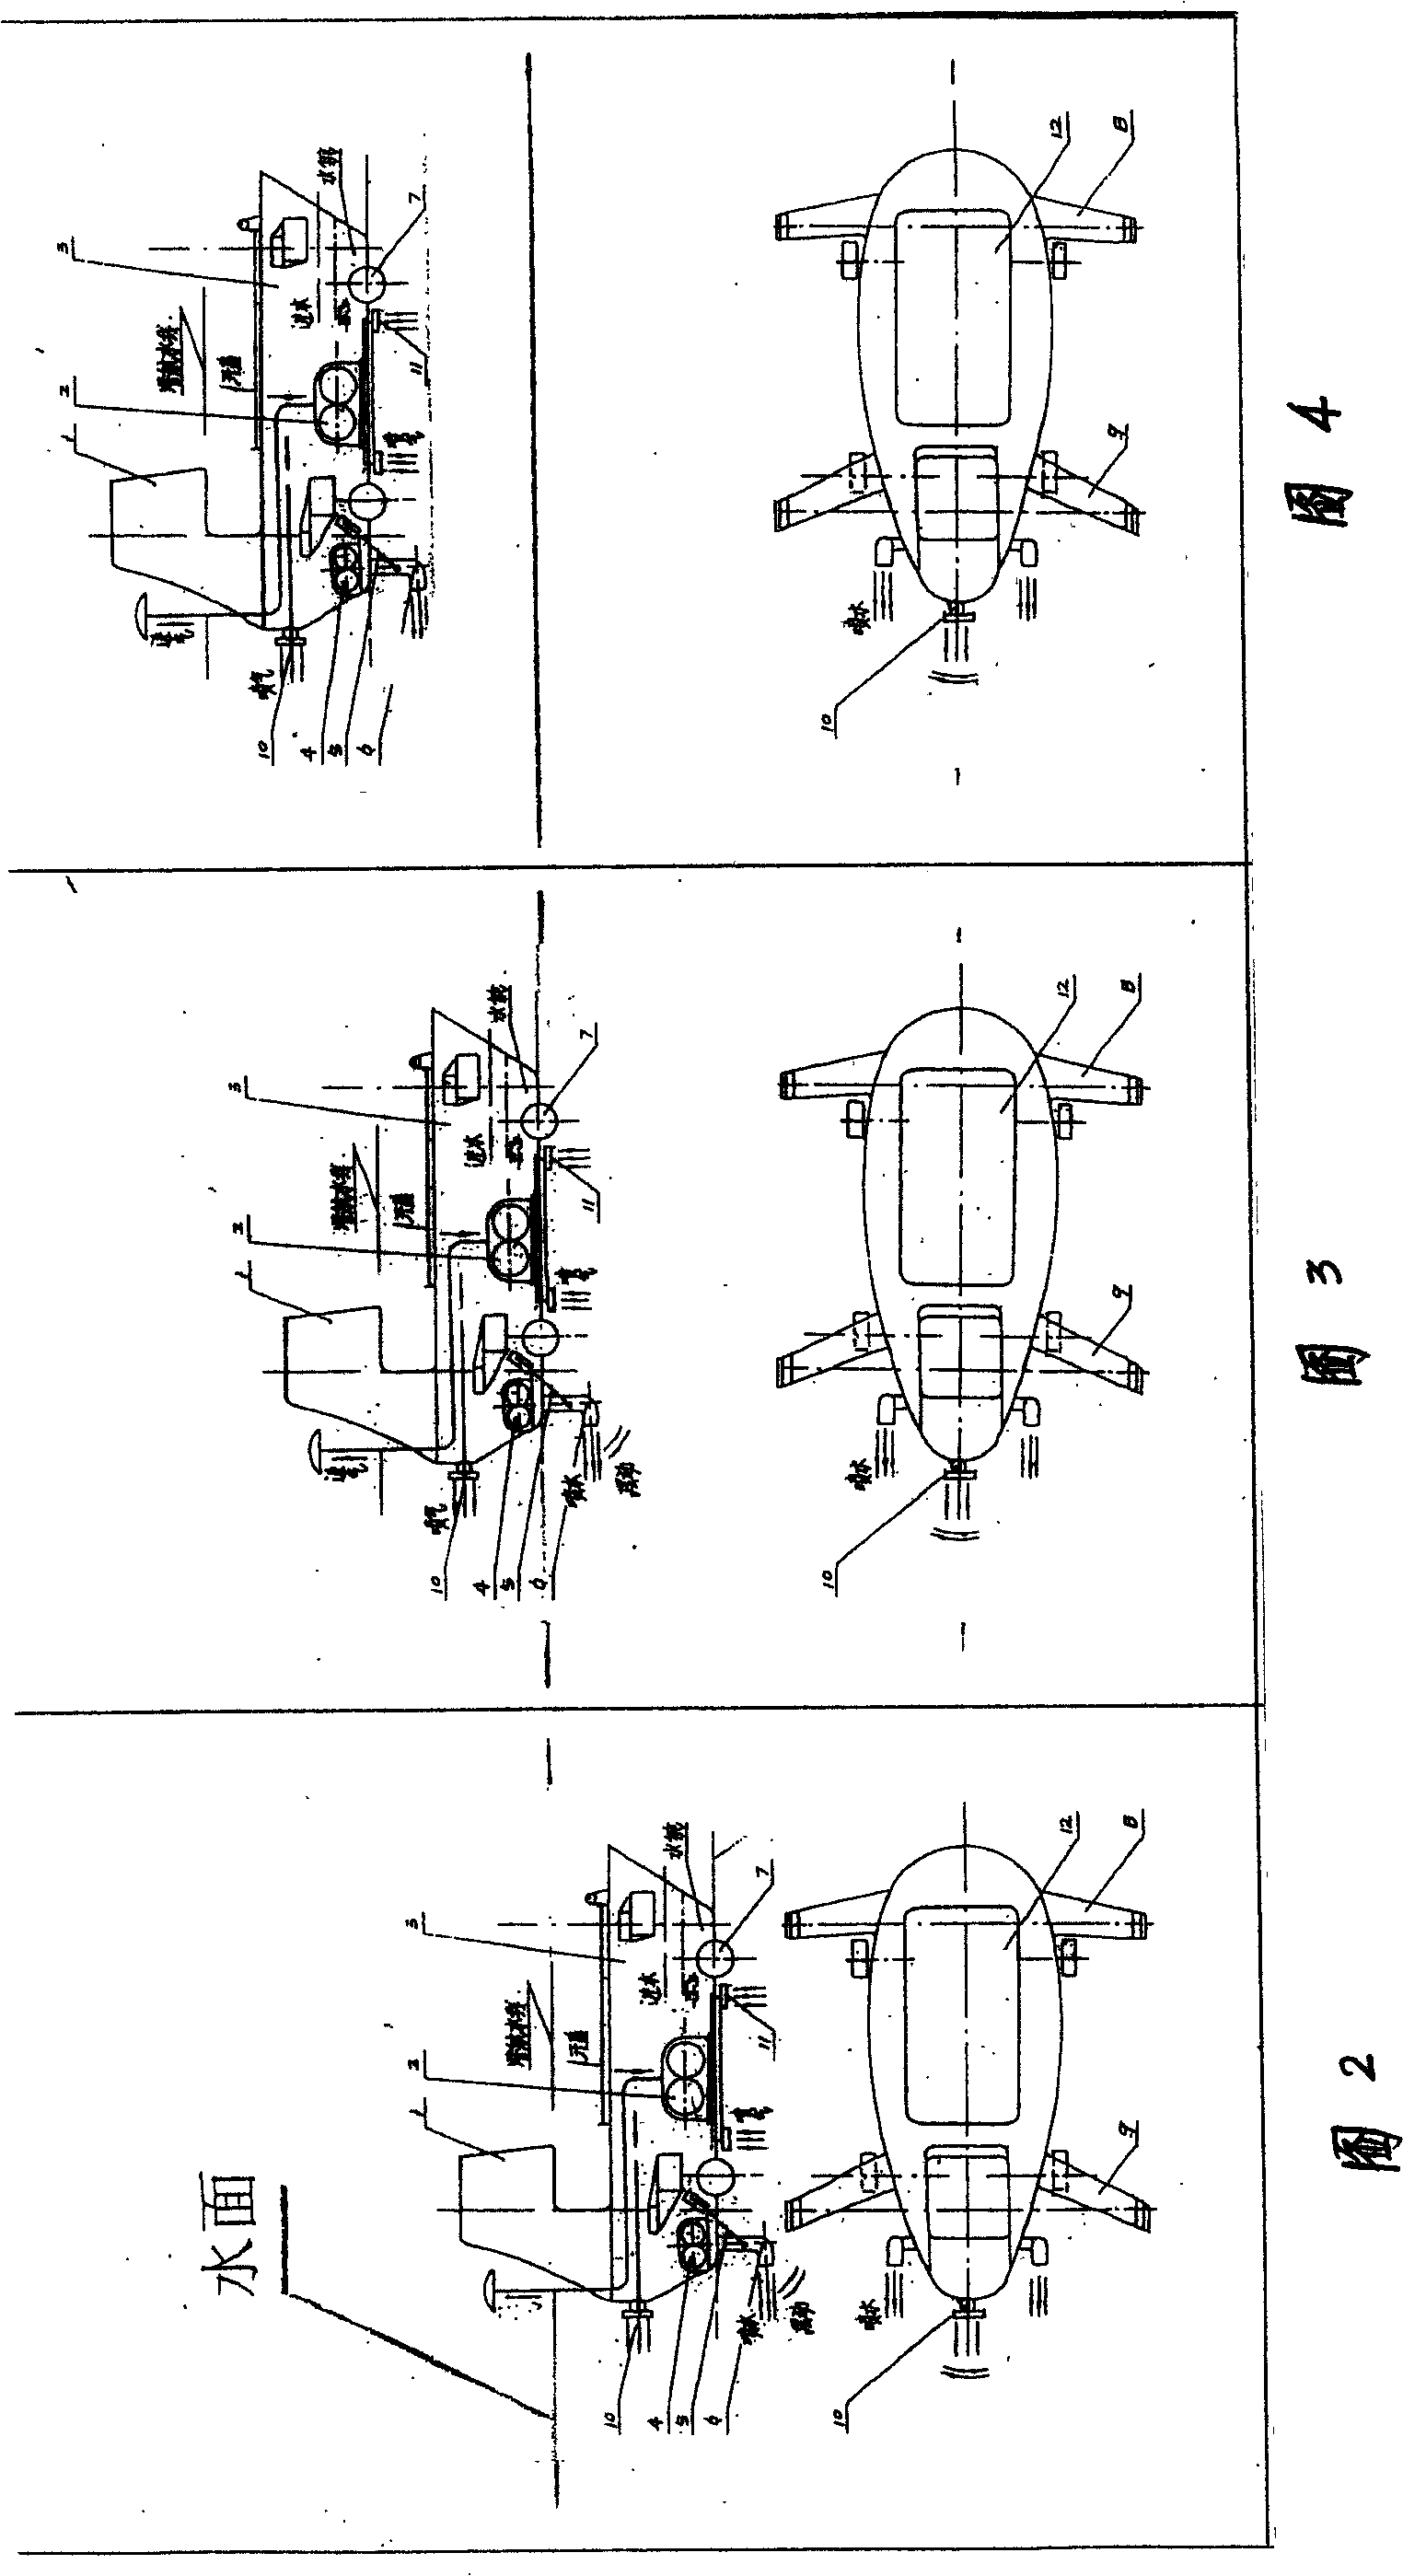 Ground-effect vehicle capable of shallow diving